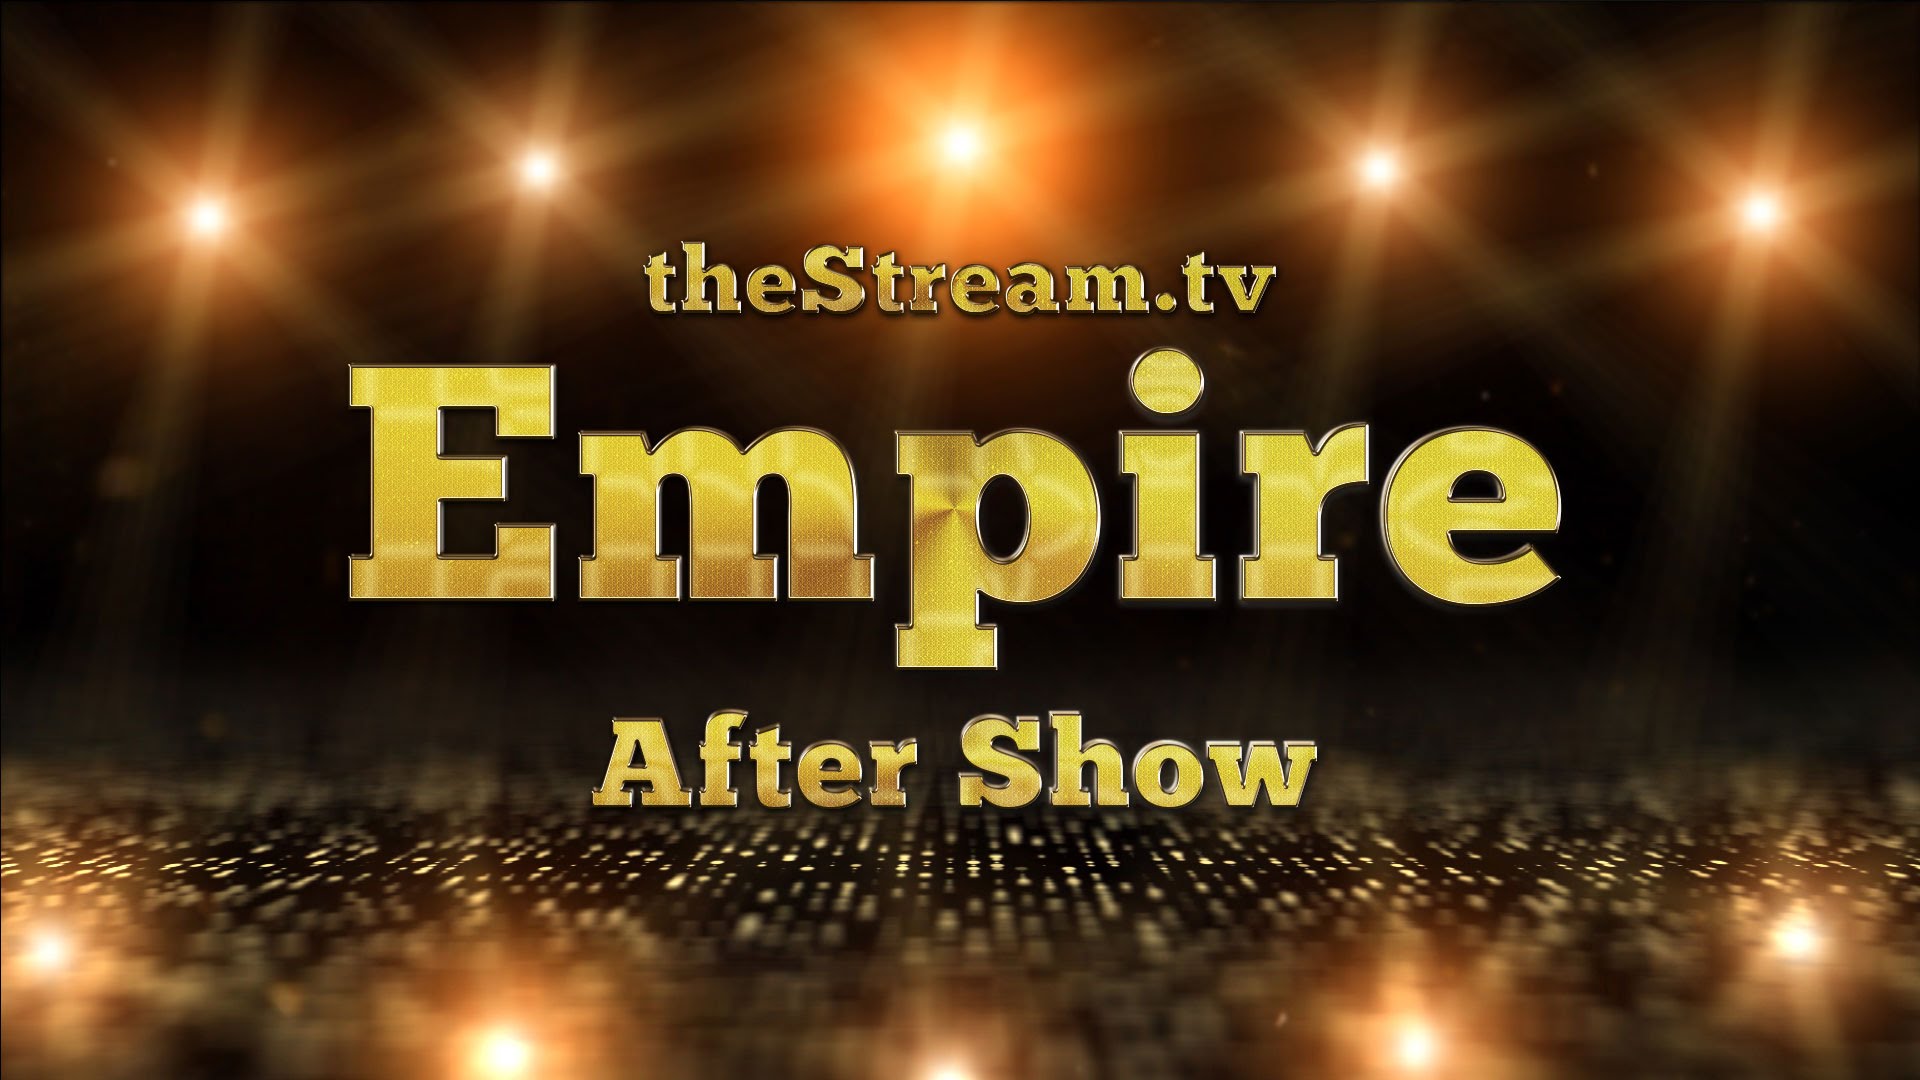 Empire After Show